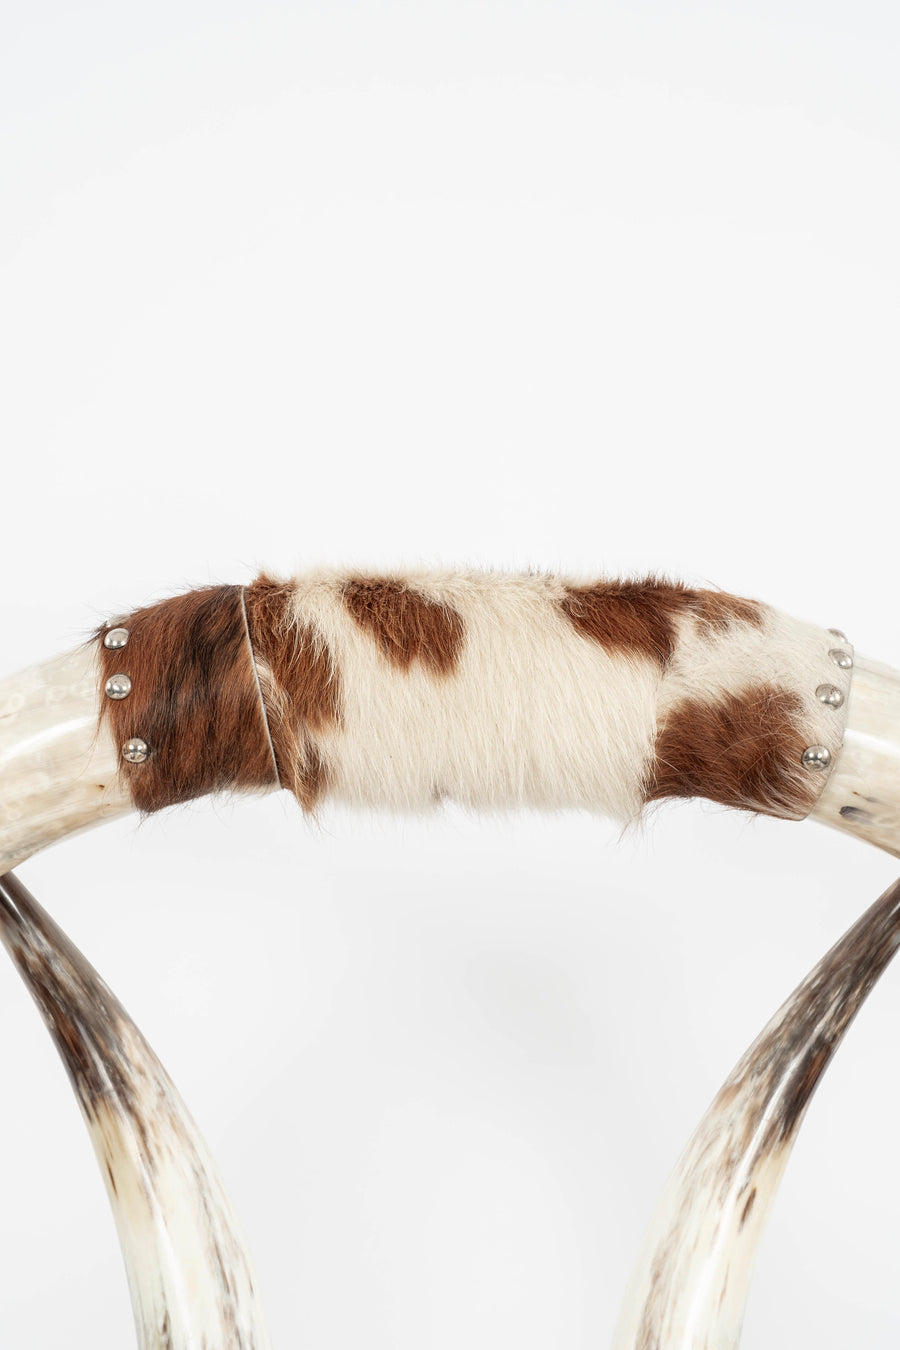 Horn and Hairhide Chair